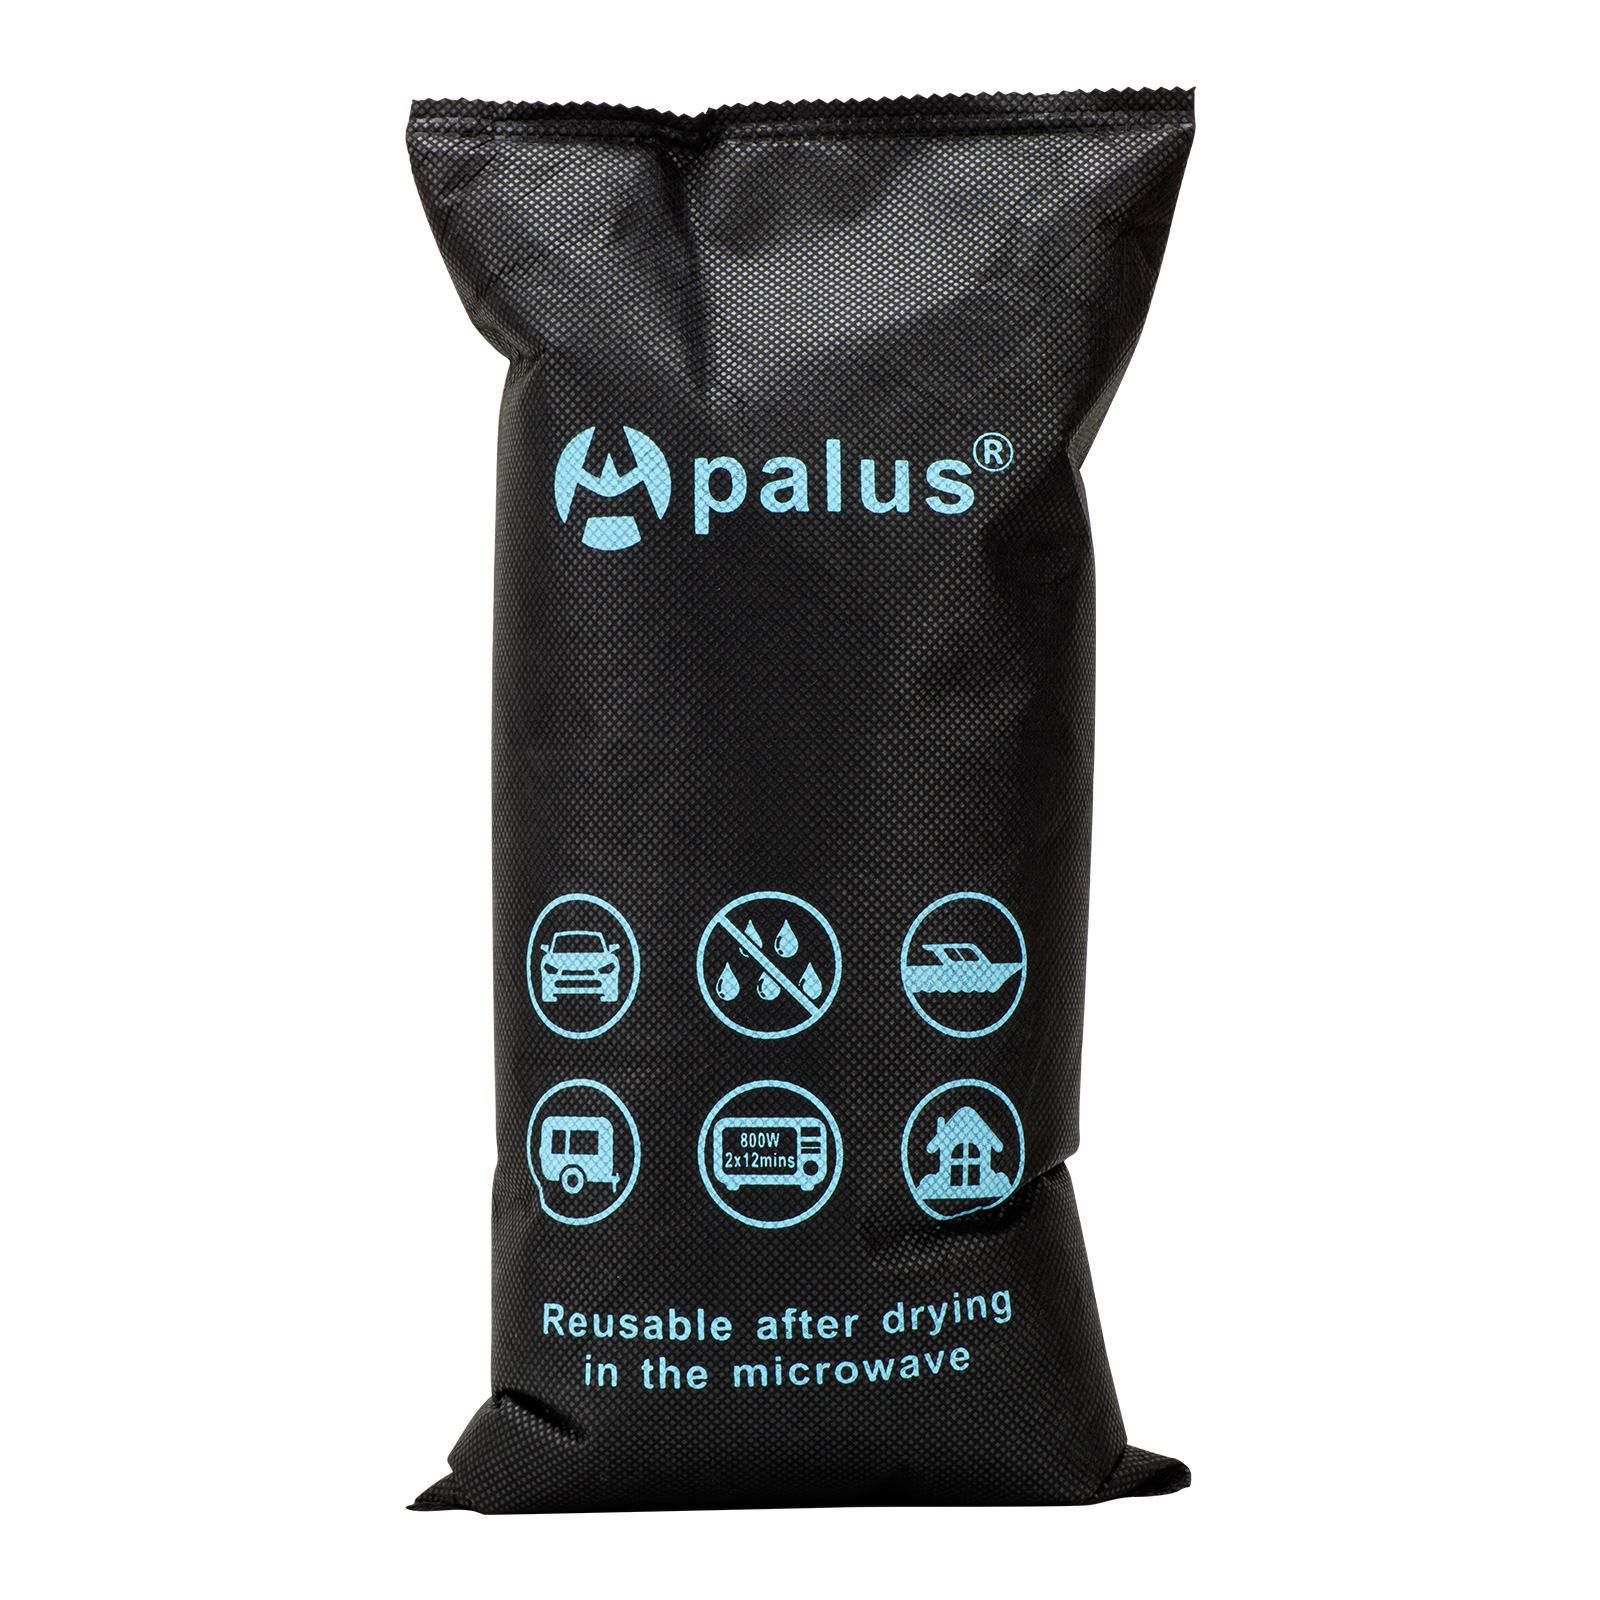 Apalus 1KG Silica Gel Car Dehumidifier, Dry Air, DMF Free, Reusable Moisture Absorber Bag, Automotive Dehumidifier, Keep Windows Fog-Free. Prevents Condensation and Mold, Perfect for Car,1KG Pack